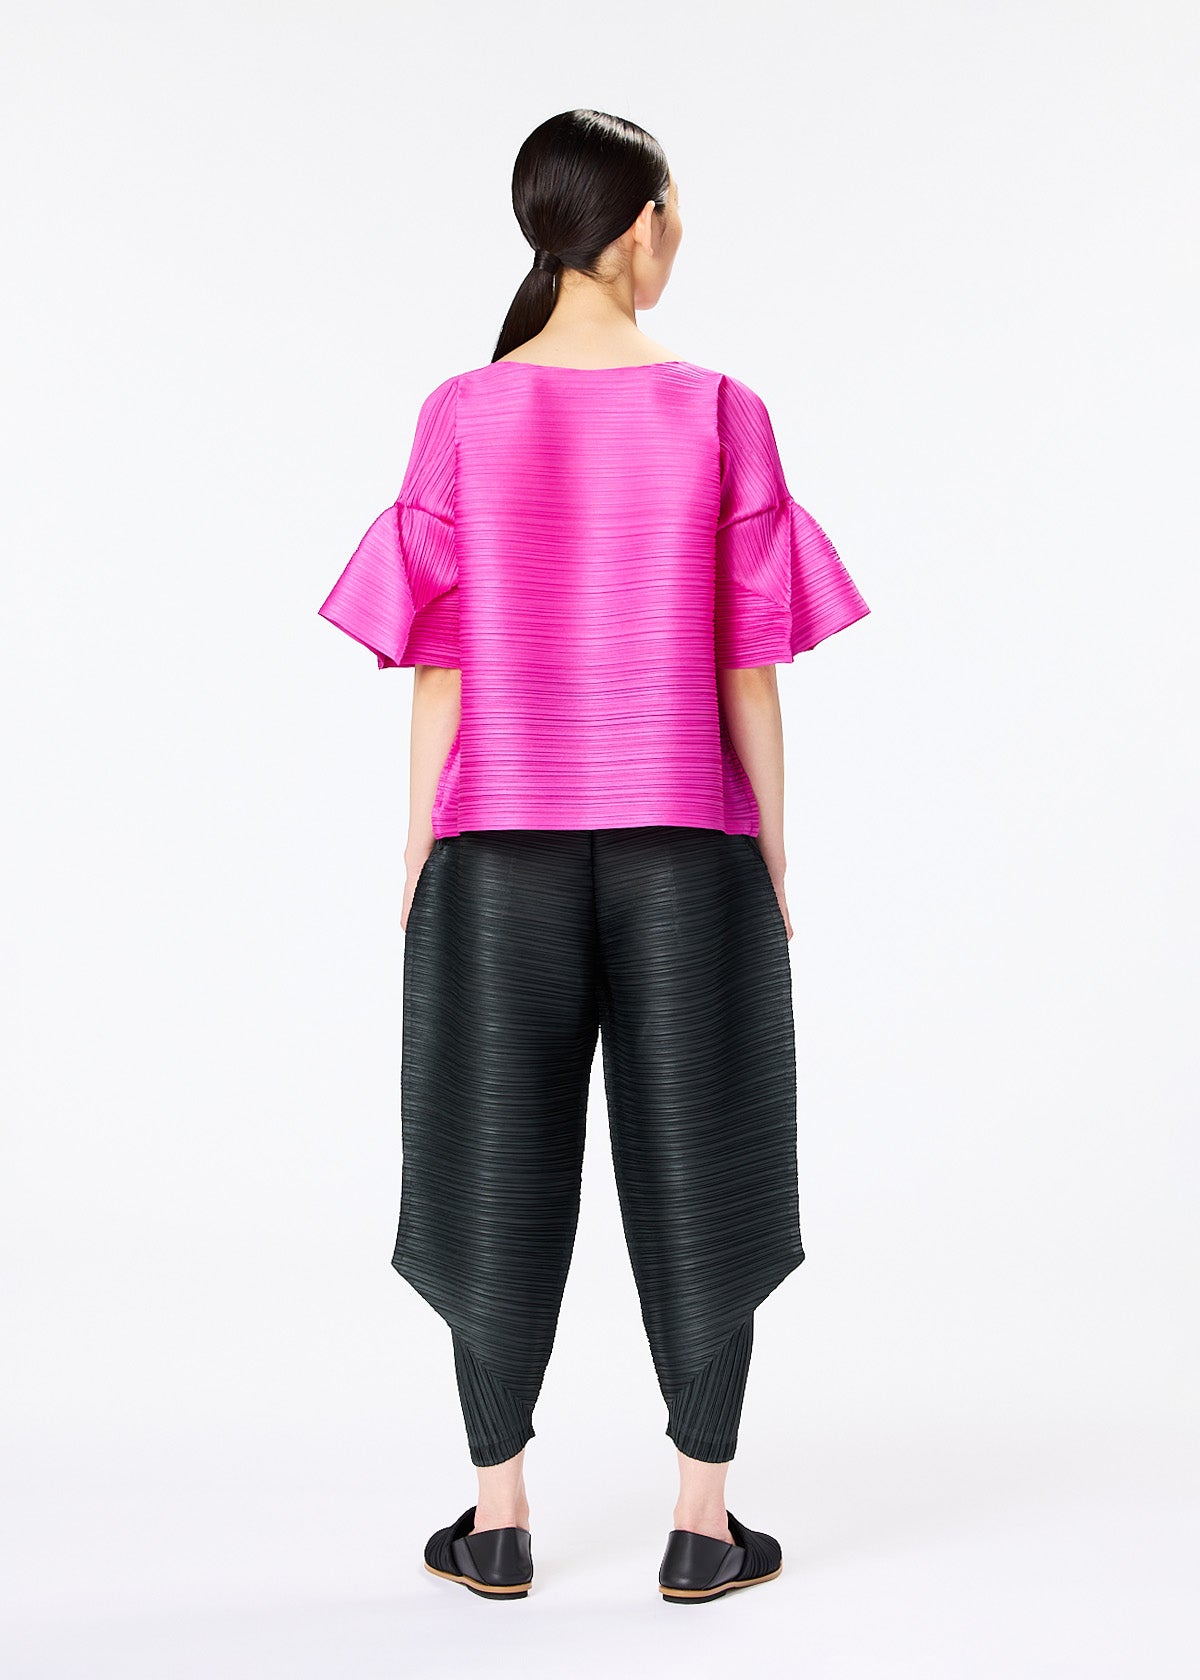 TOUR PANTS | The official ISSEY MIYAKE ONLINE STORE | ISSEY MIYAKE USA